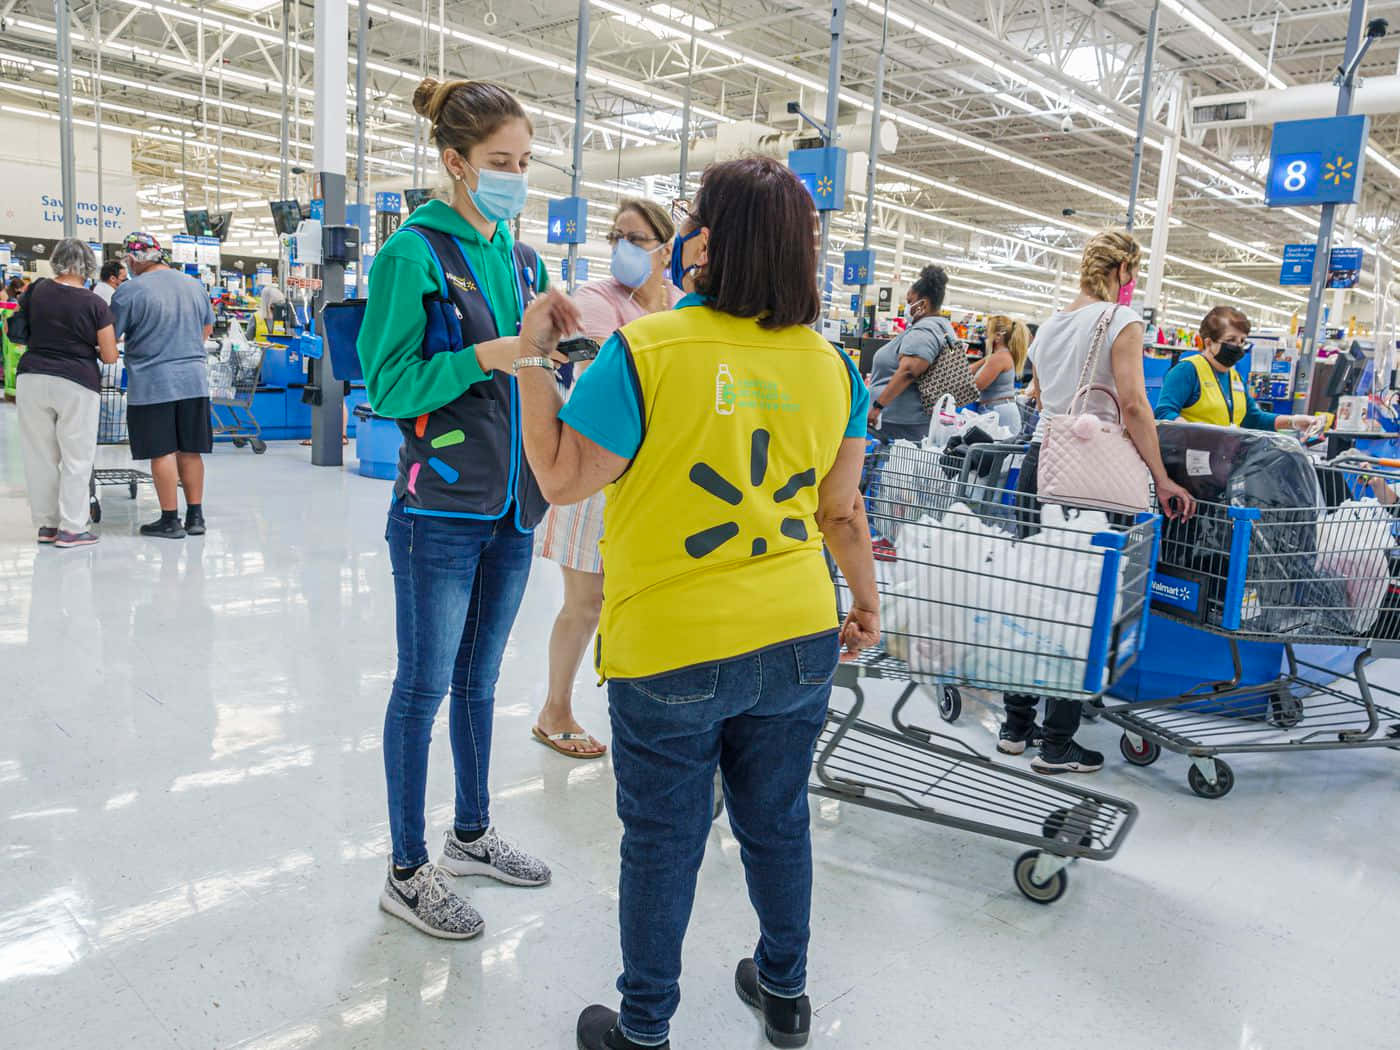 Walmart shoppers searching for their favorite items at a Supercenter location.